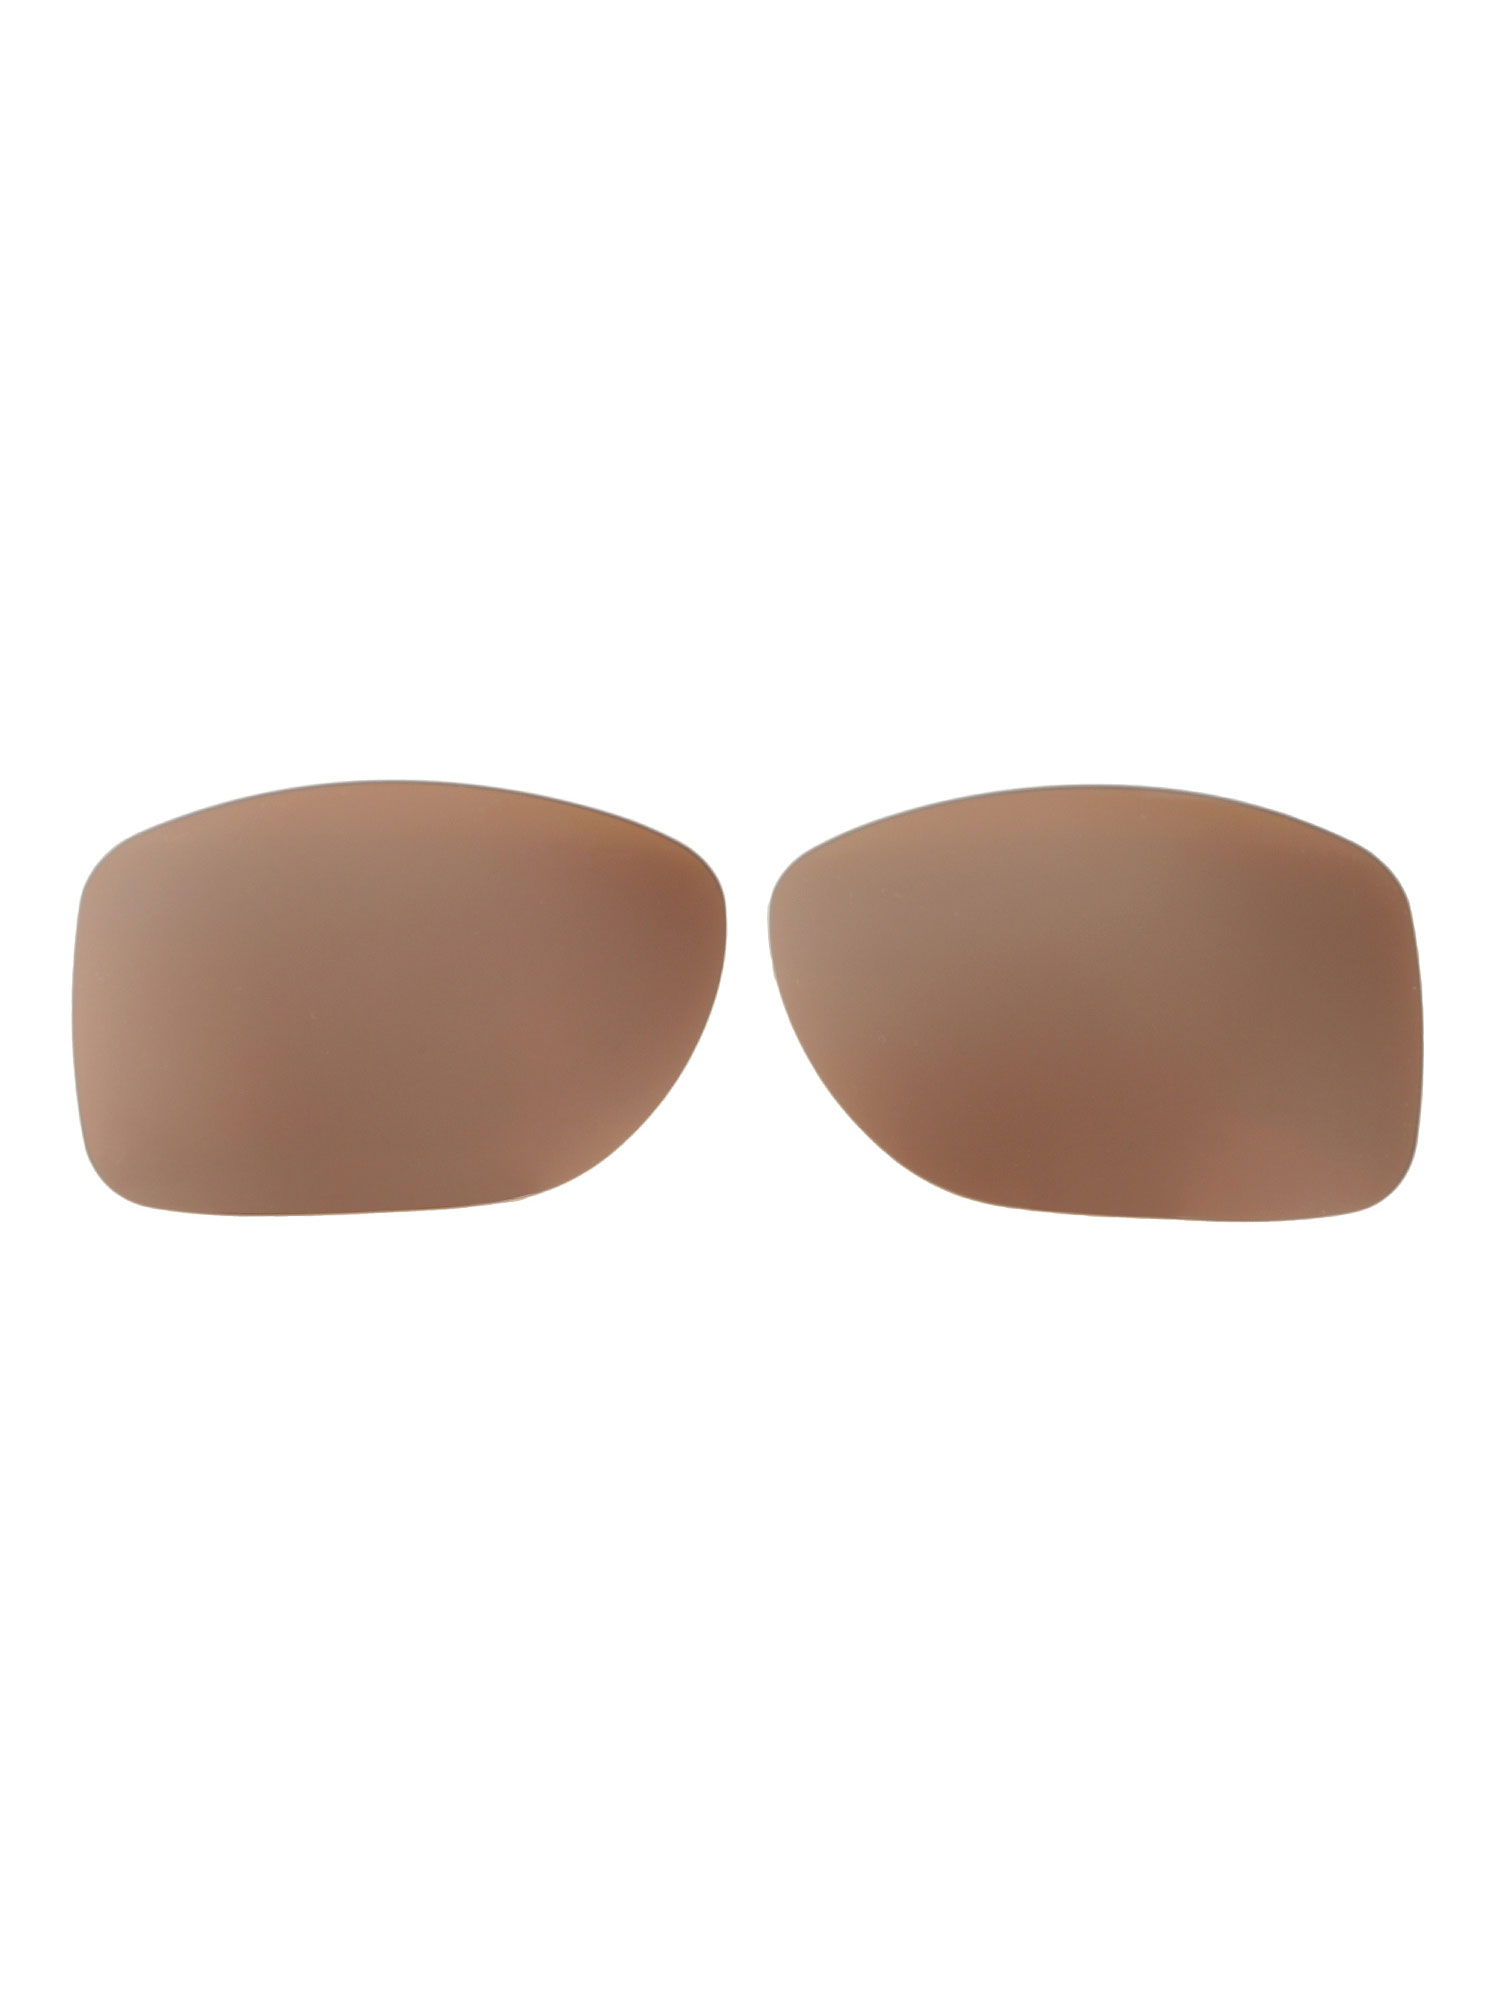 Walleva Brown Polarized Replacement Lenses for Oakley Gauge 8 M Sunglasses - image 1 of 7